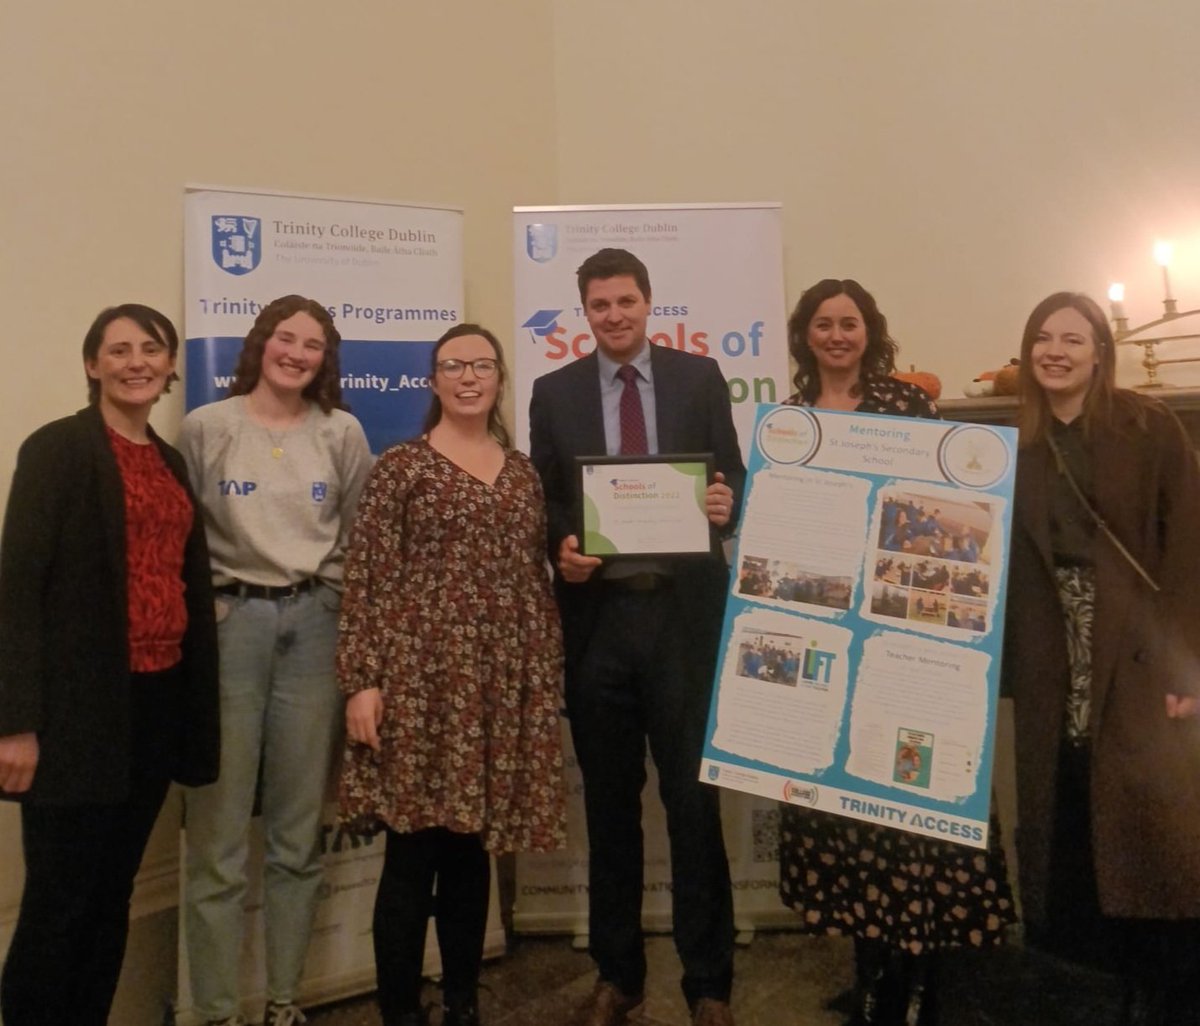 Delighted to accept our @AccessTCD #schoolsofdistinction2022 Transformation Award yesterday for the whole STJ school community 💙 and promote our Mentoring core practices #inclusivetrinity @stjosephsrush @RoisinMcGowan42 @aideenlowe @LouiseNiChon